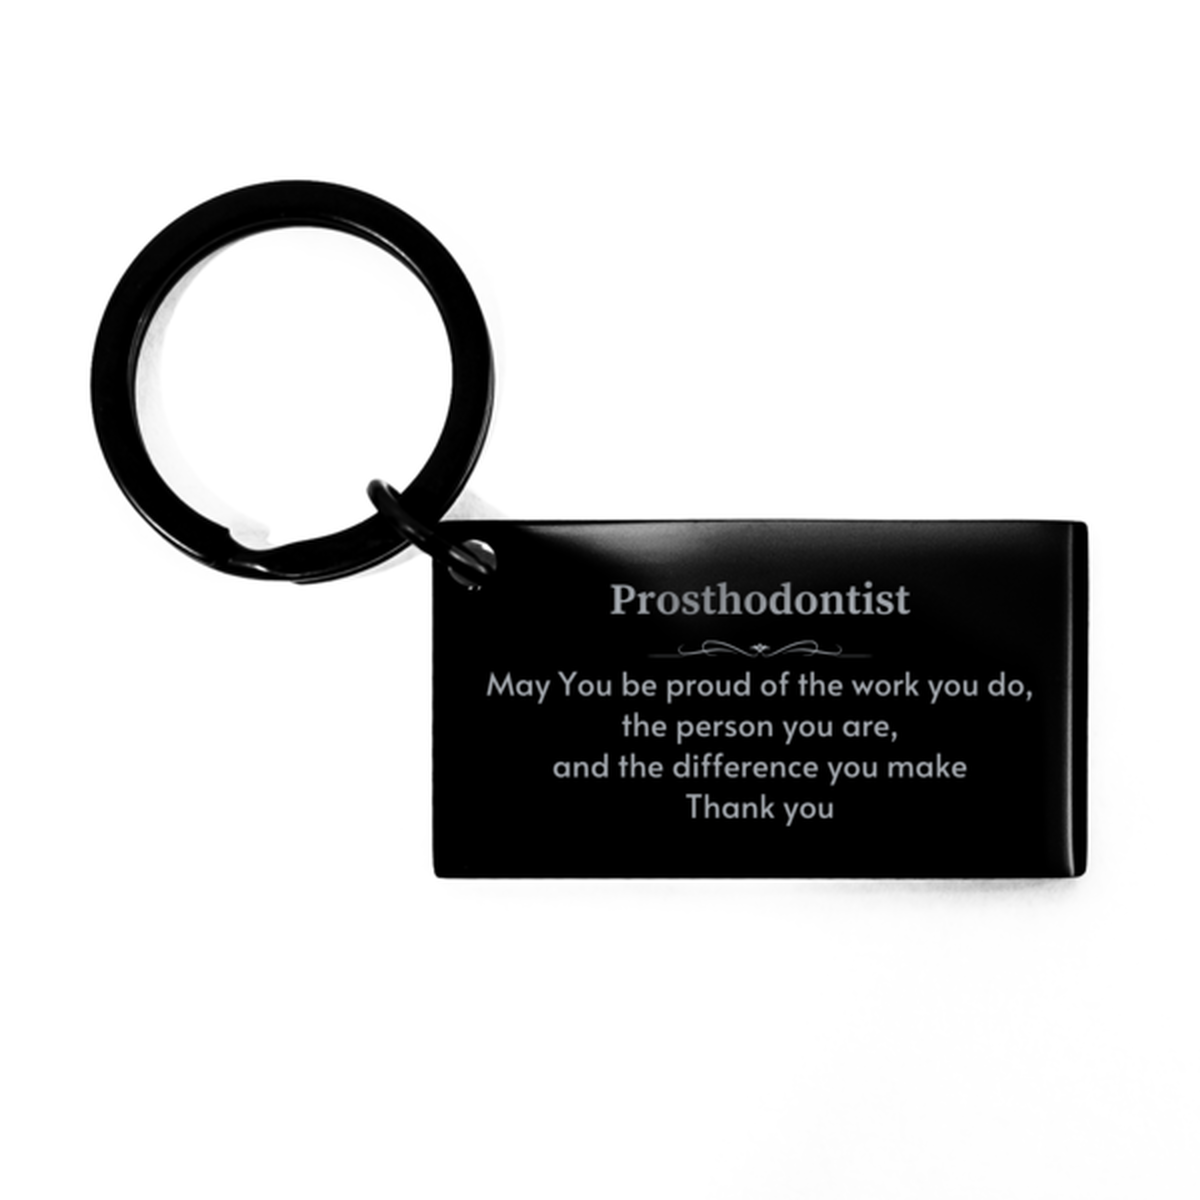 Heartwarming Keychain Retirement Coworkers Gifts for Prosthodontist, Social Worker May You be proud of the work you do, the person you are Gifts for Boss Men Women Friends